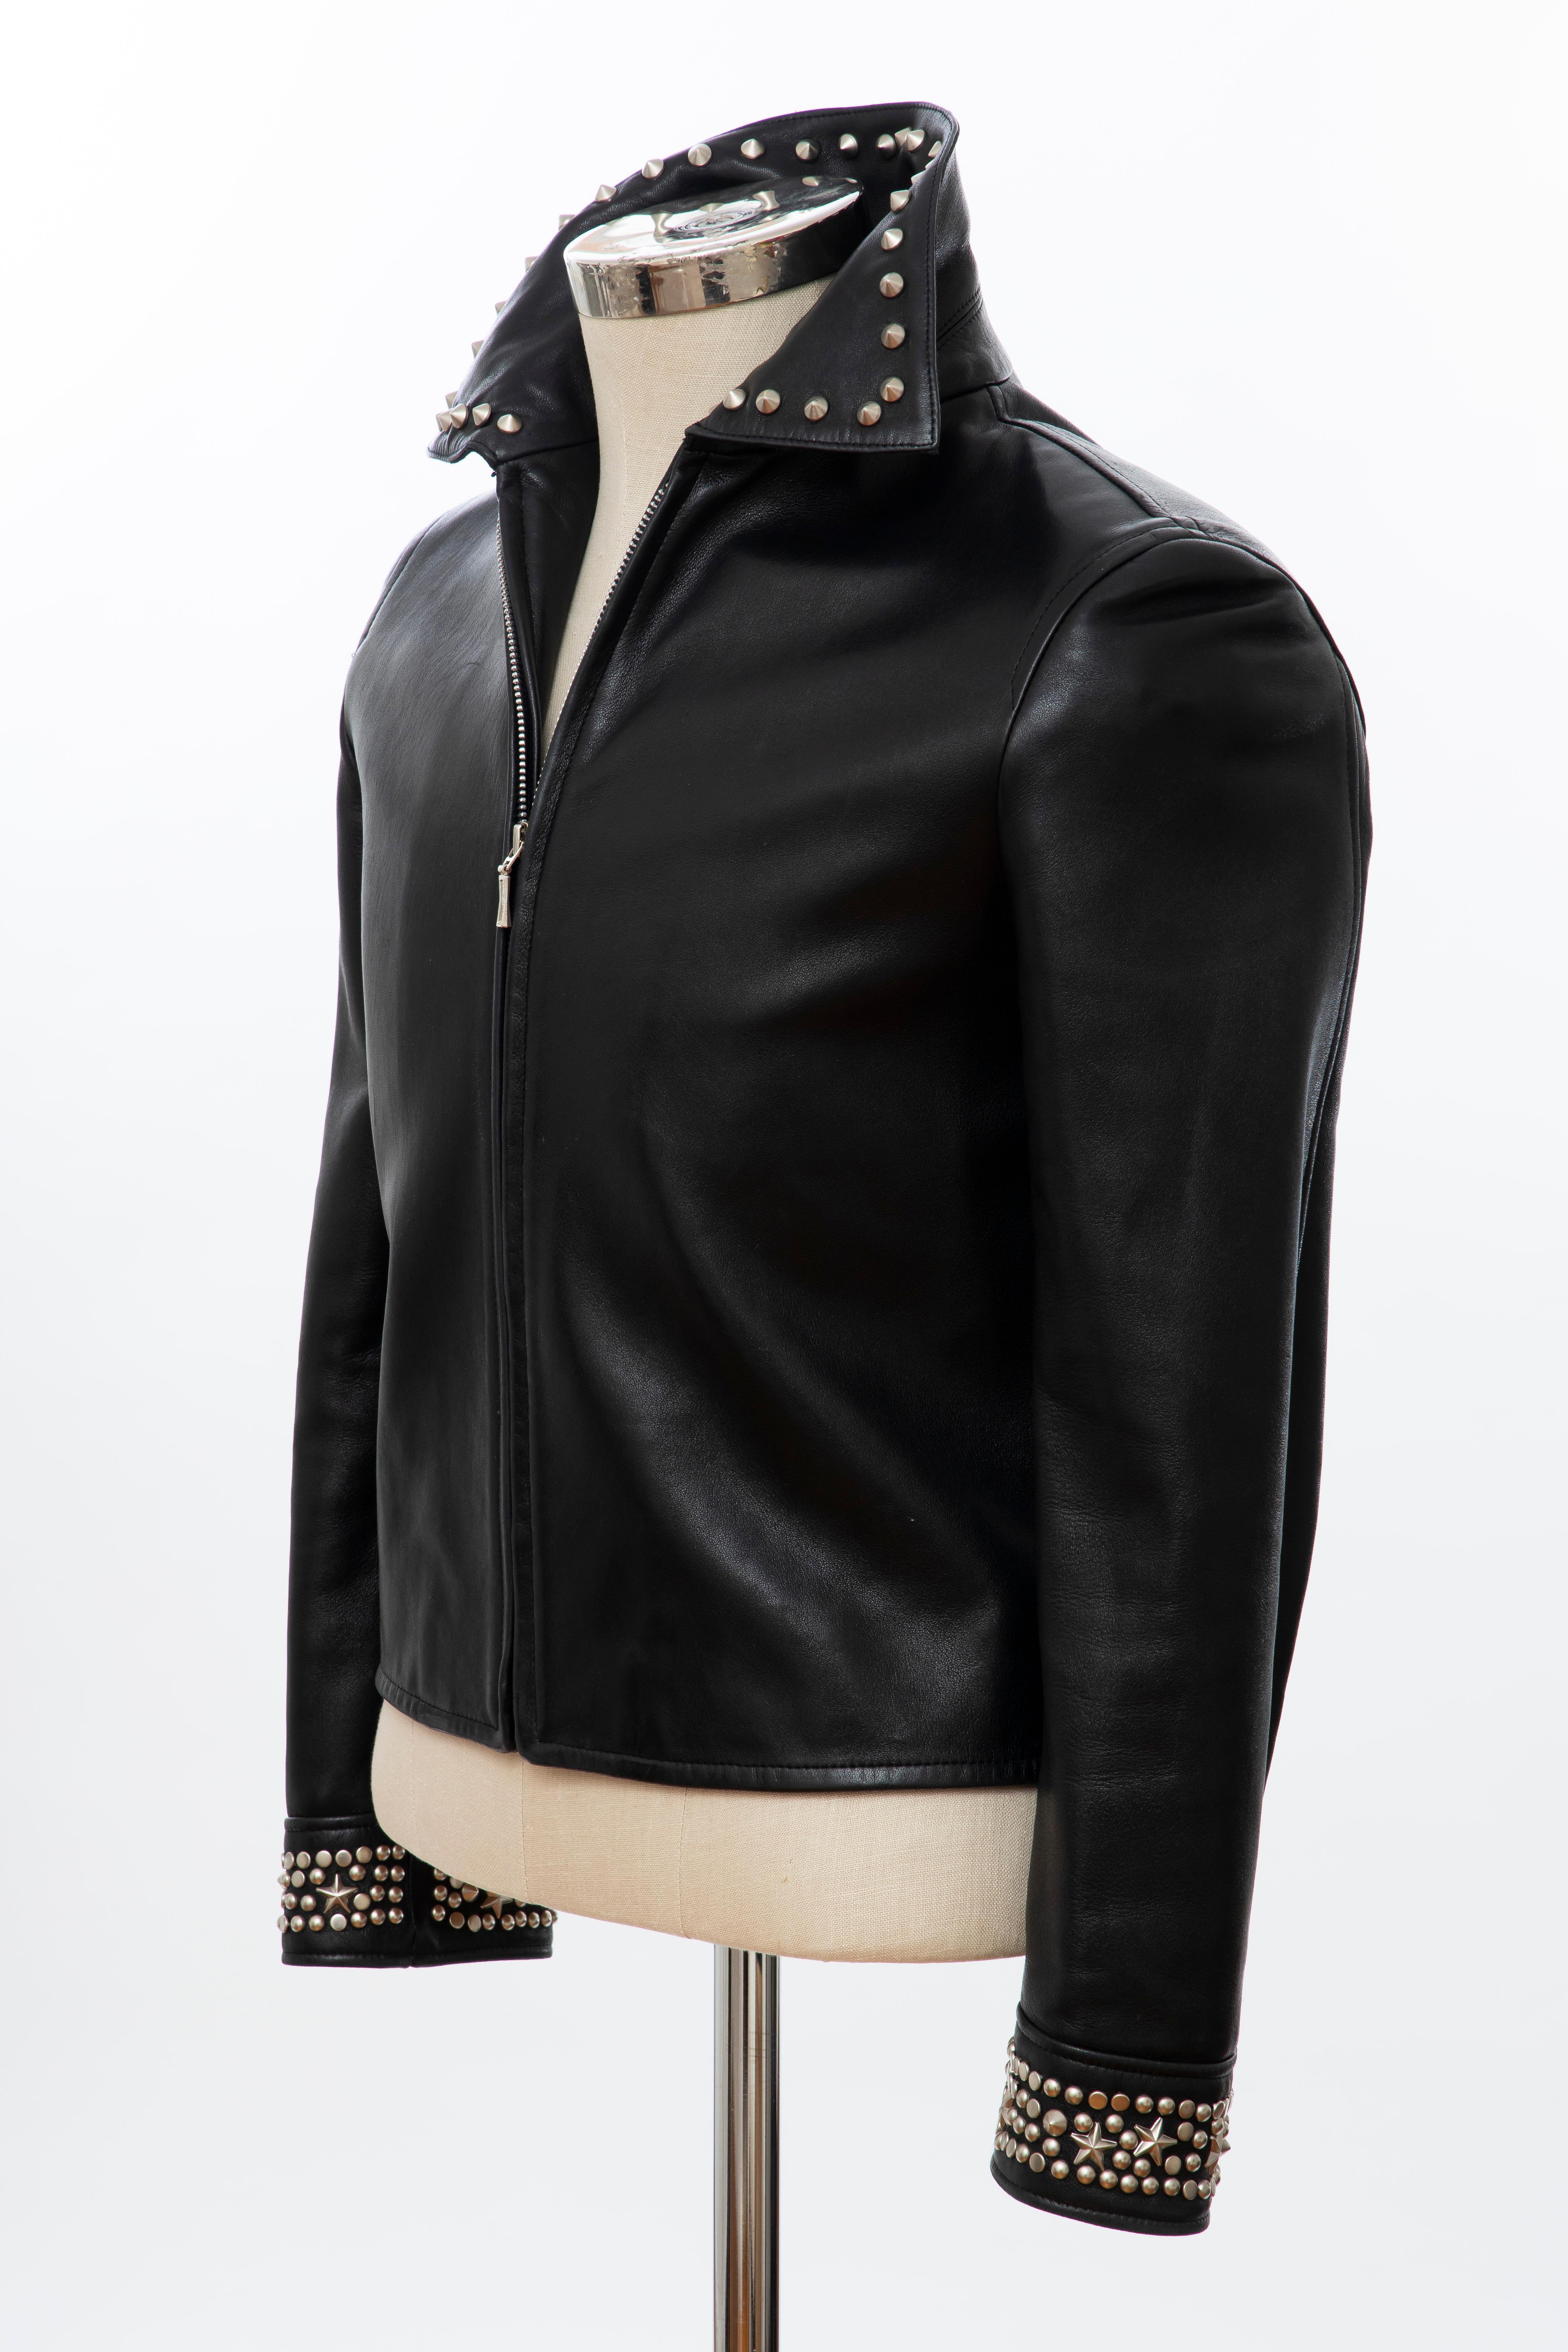 Gianni Versace Black Leather Jacket Pewter Stud Collar & Cuffs,  Circa: 1990's For Sale 5